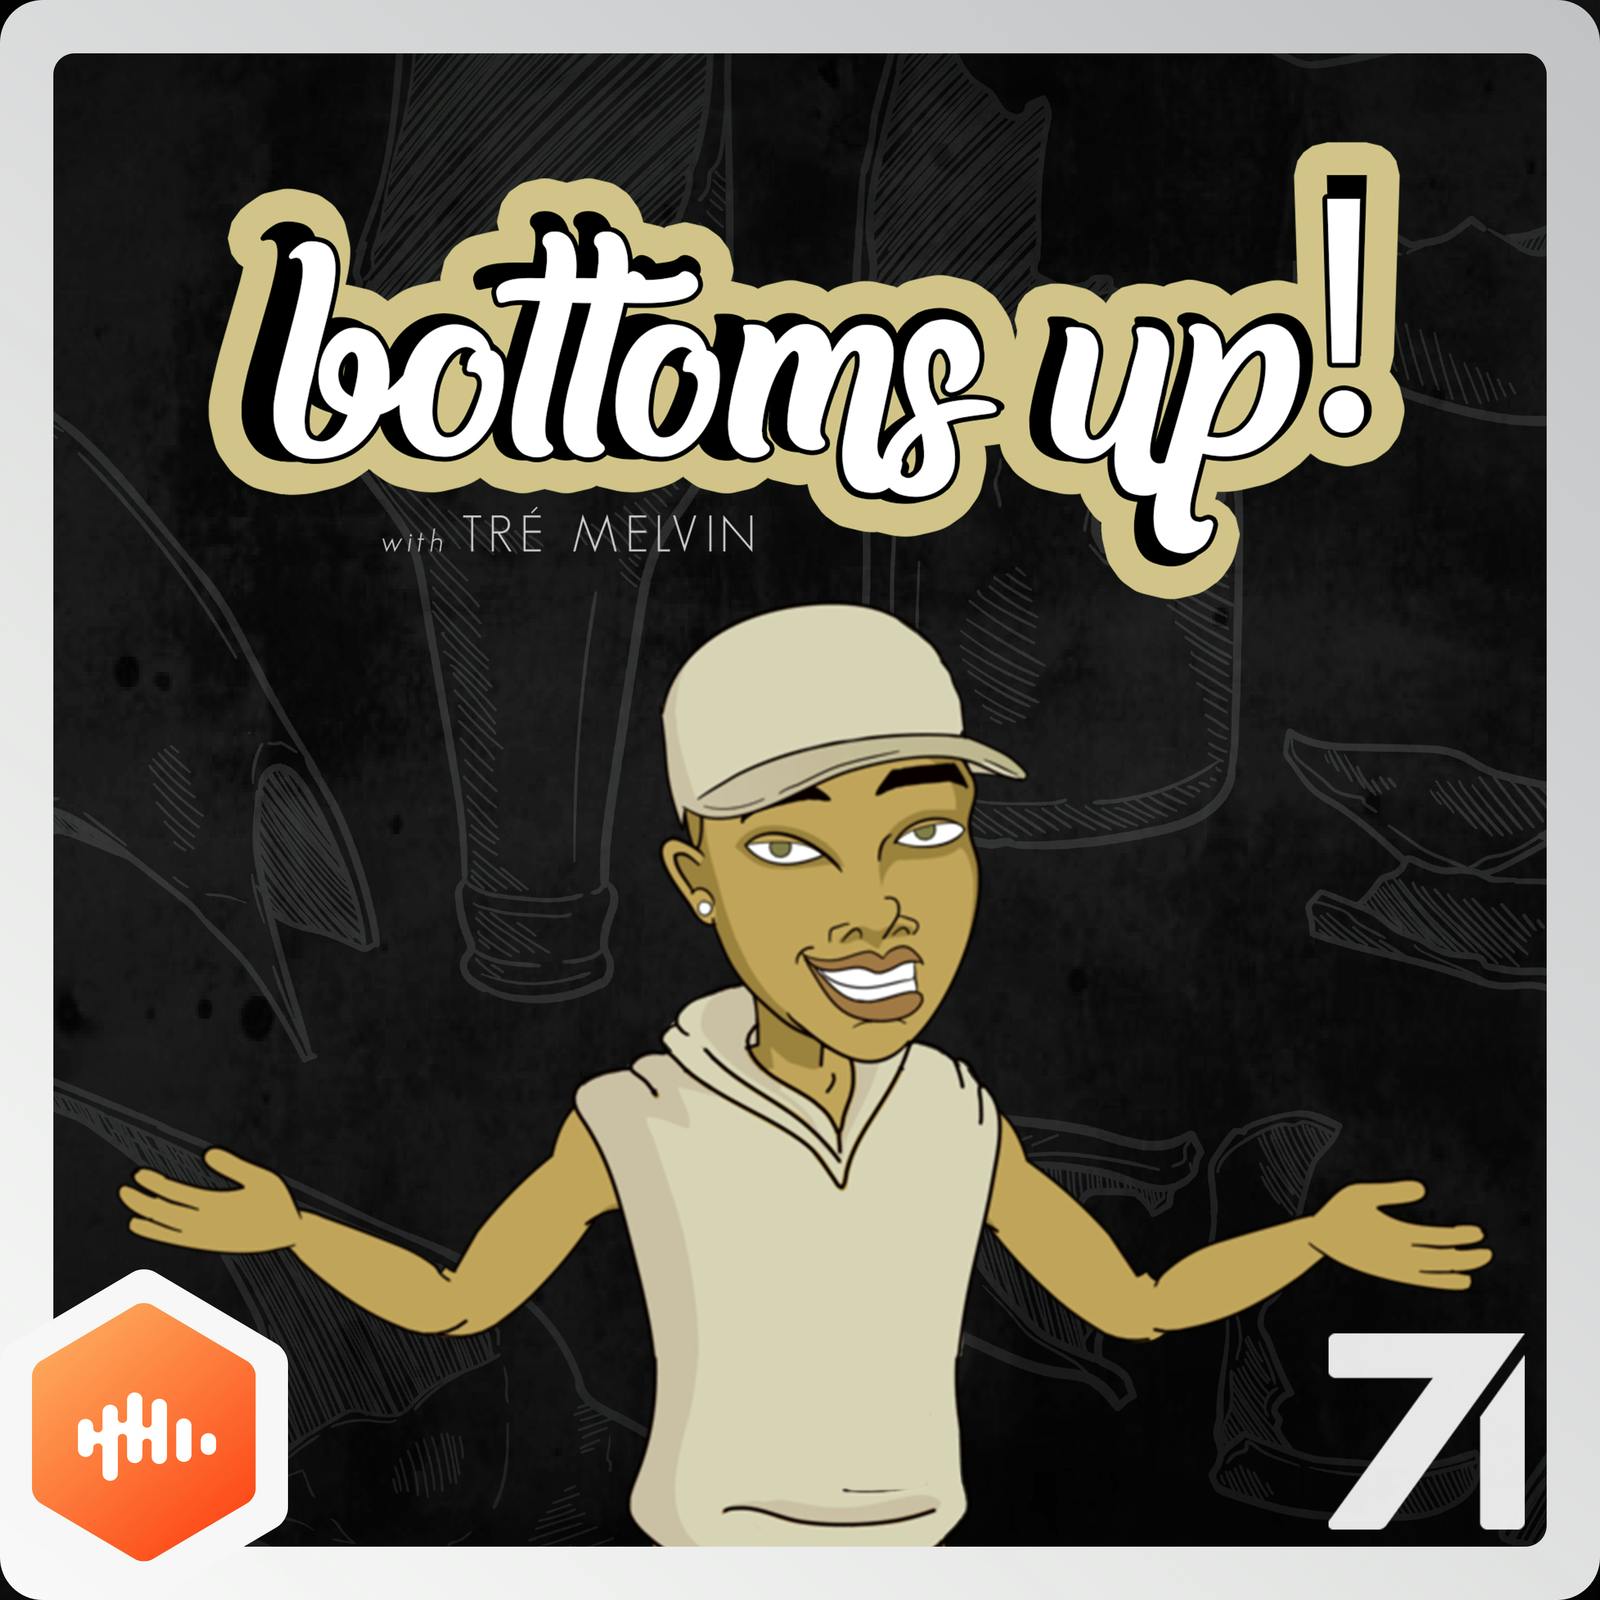 15: Mind Power Patrón (feat. HeFlawless) - Bottoms Up! with Tré Melvin